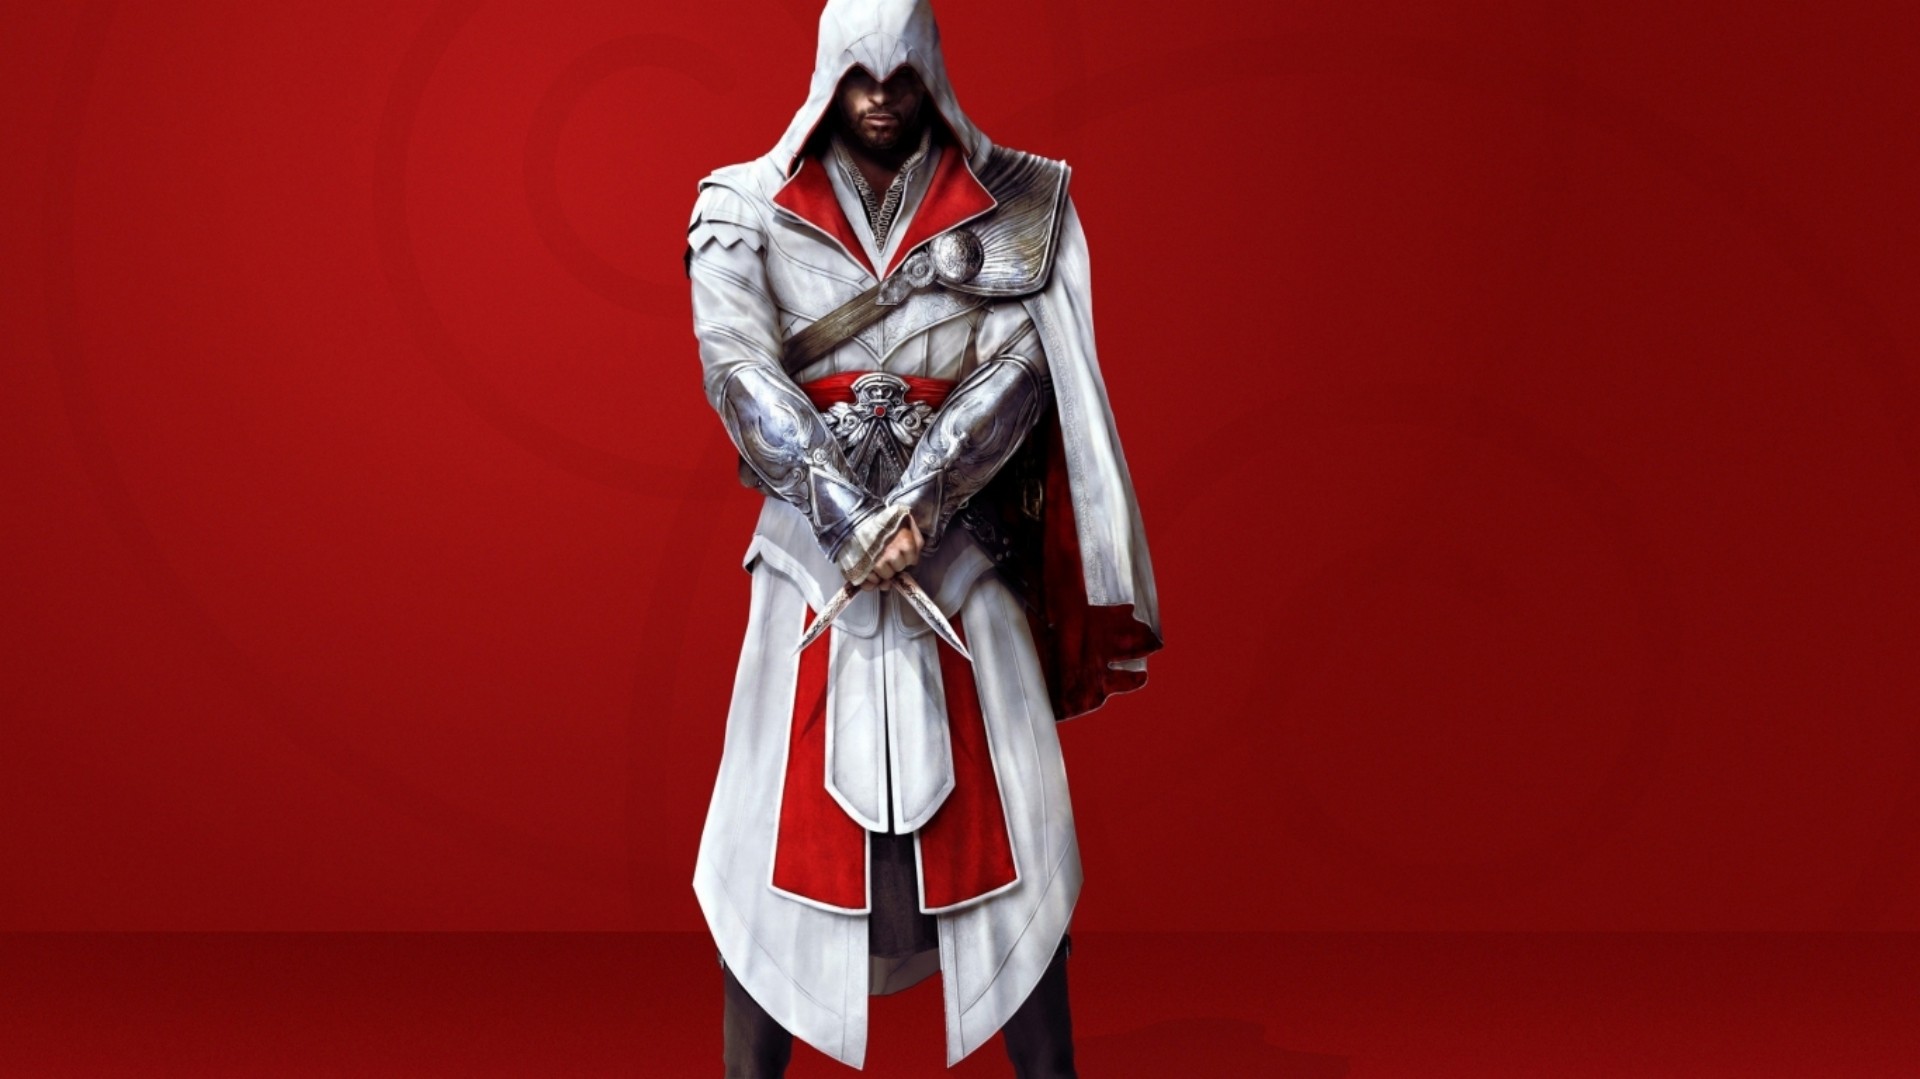 General 1920x1079 Assassin's Creed Assassin's Creed: Brotherhood video games simple background red background Ezio Auditore da Firenze frontal view